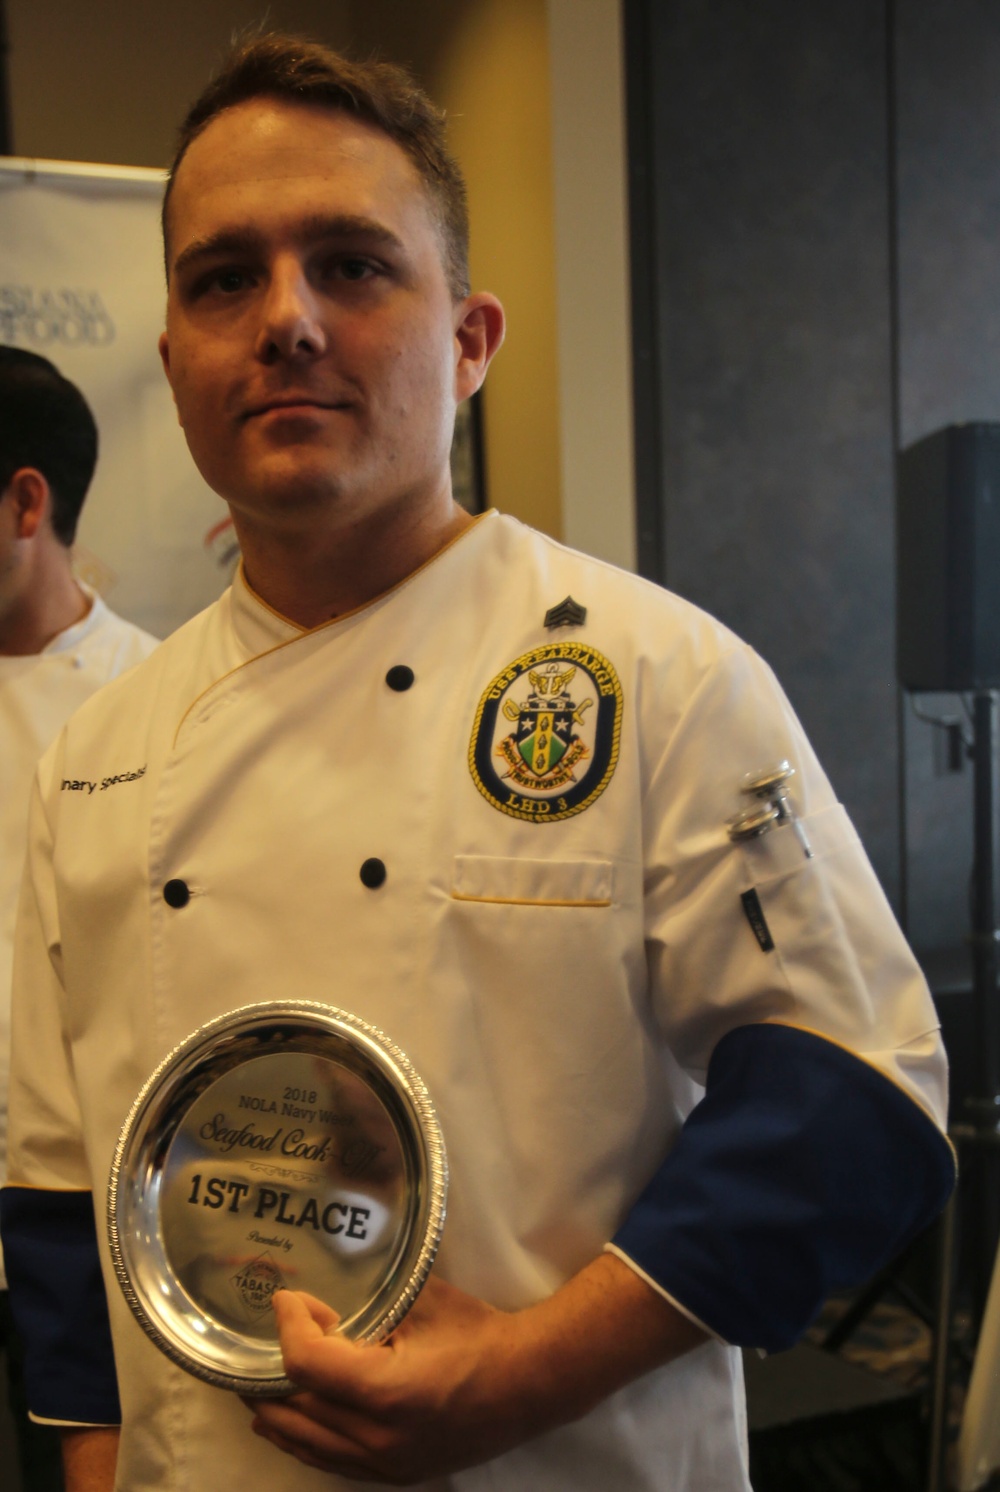 US Marines and Sailors Participate in Louisiana Seafood Cook-off